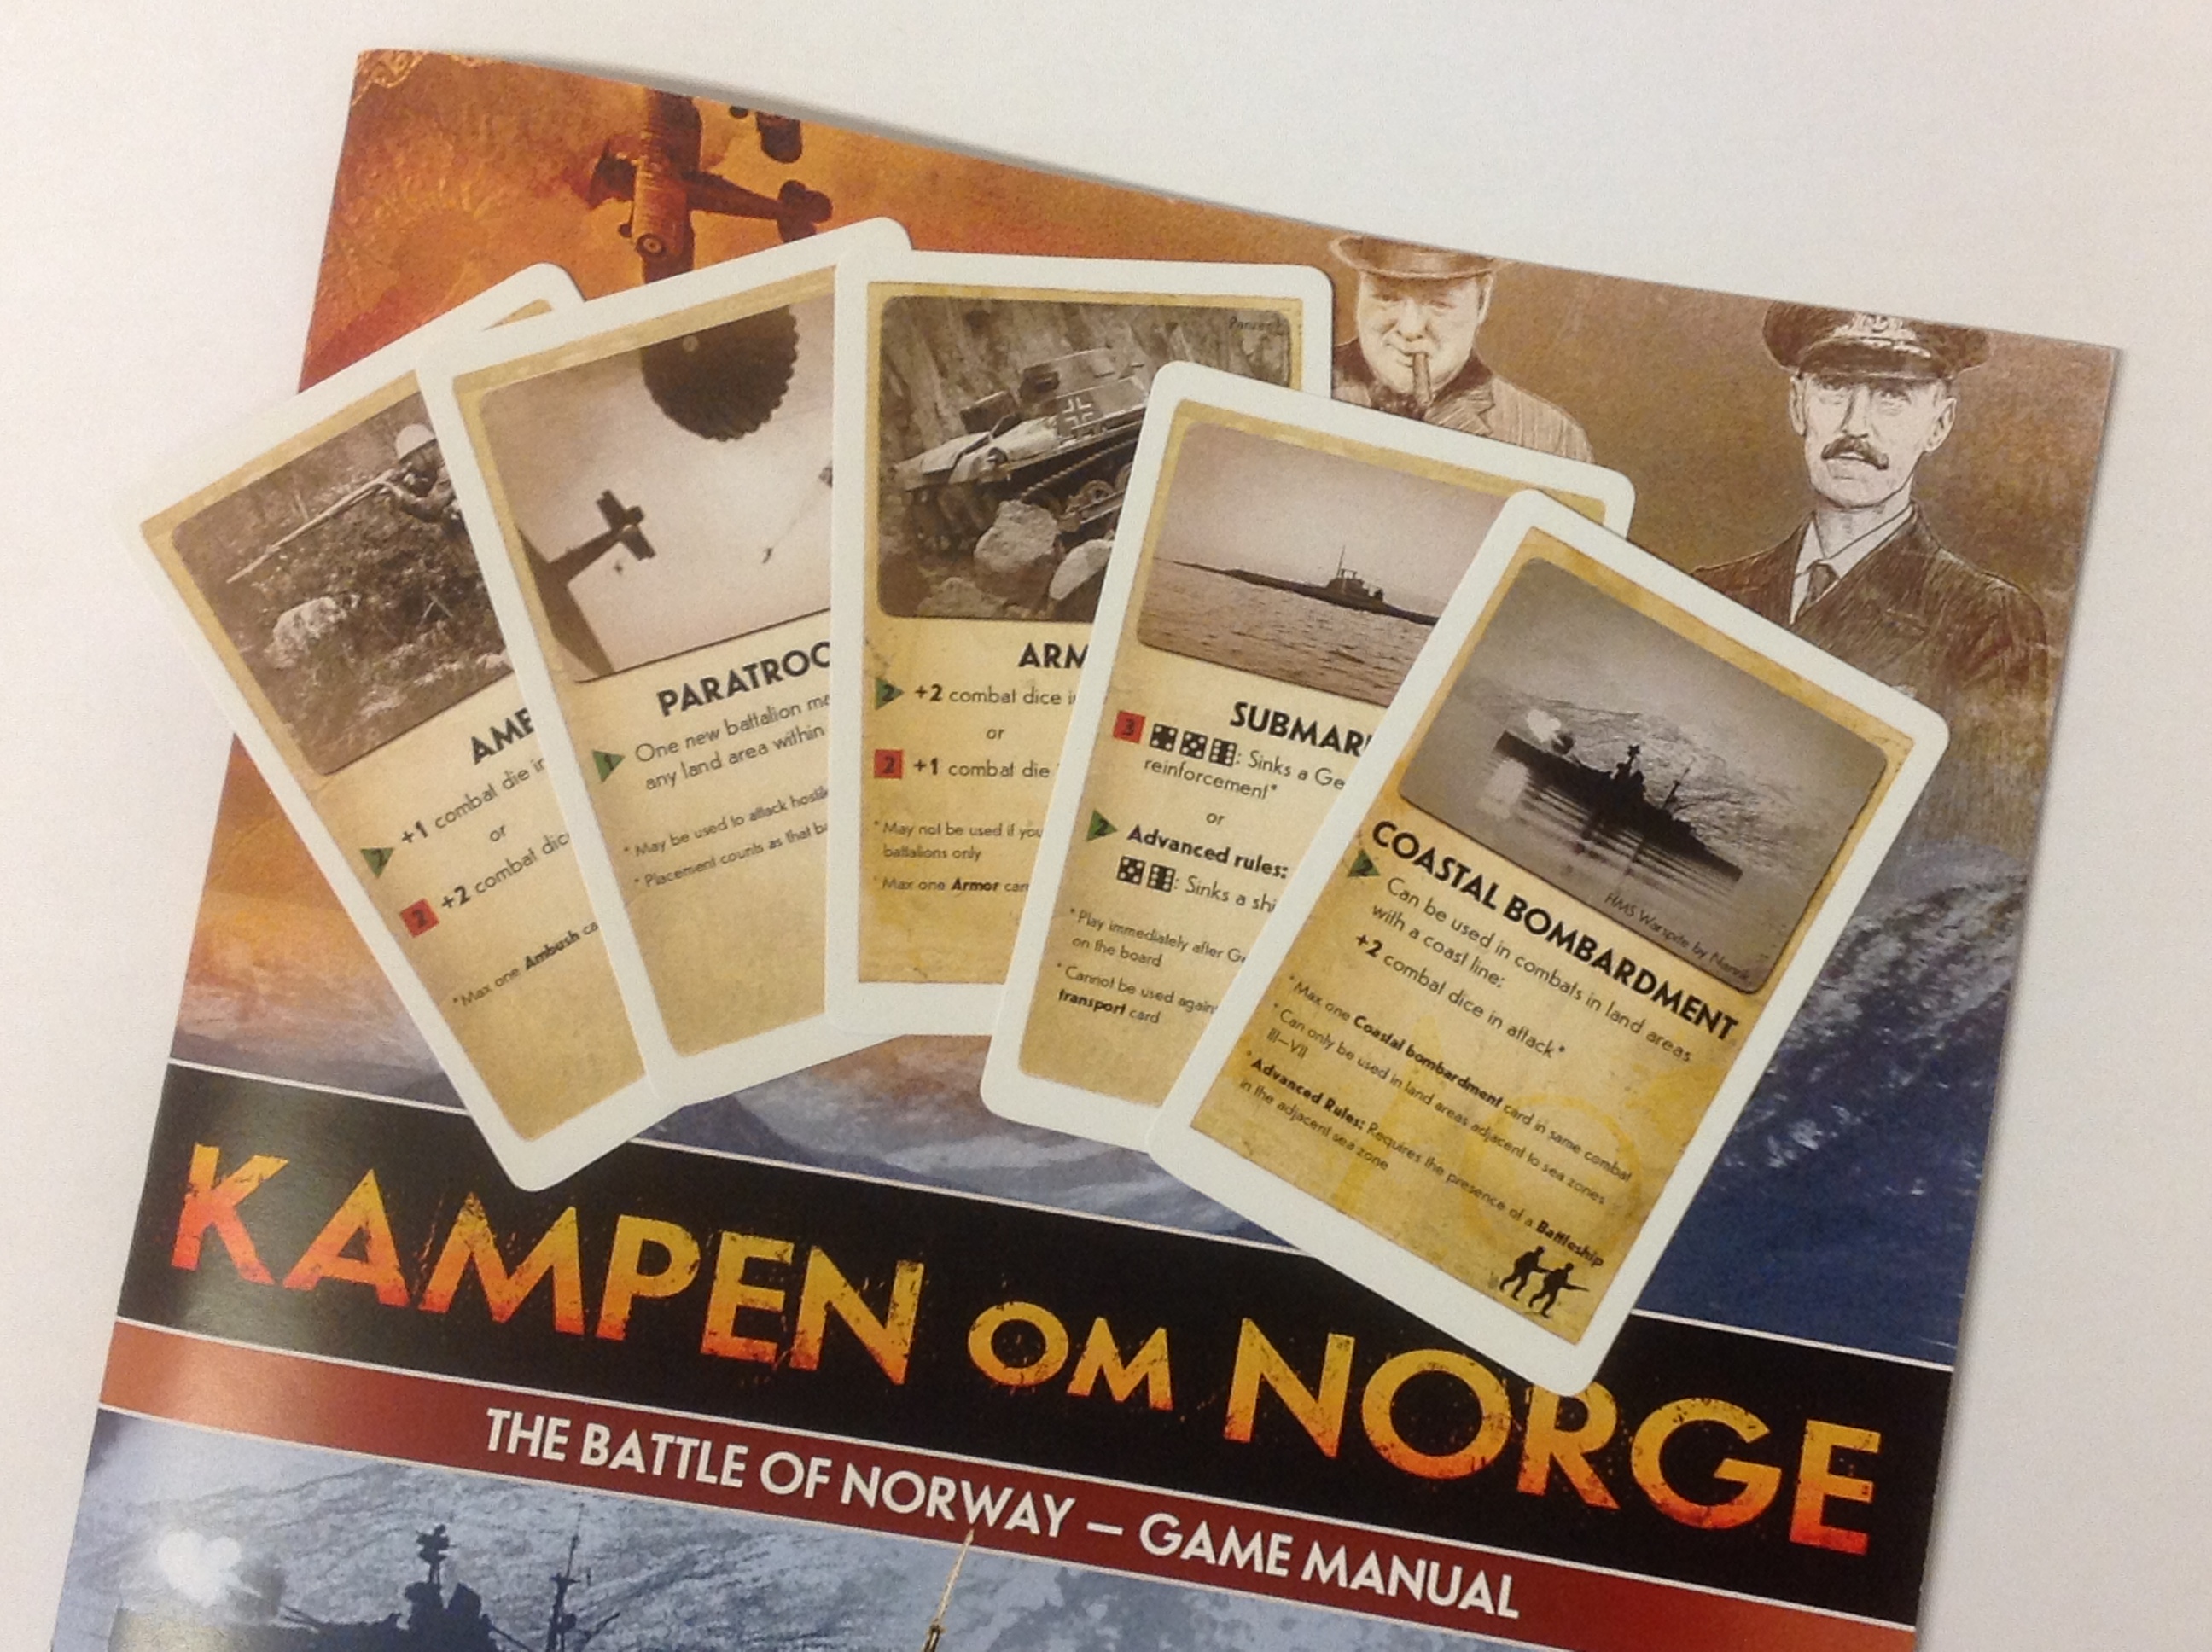 English Cards & Rules for Kampen om Norge (Battle of Norway)